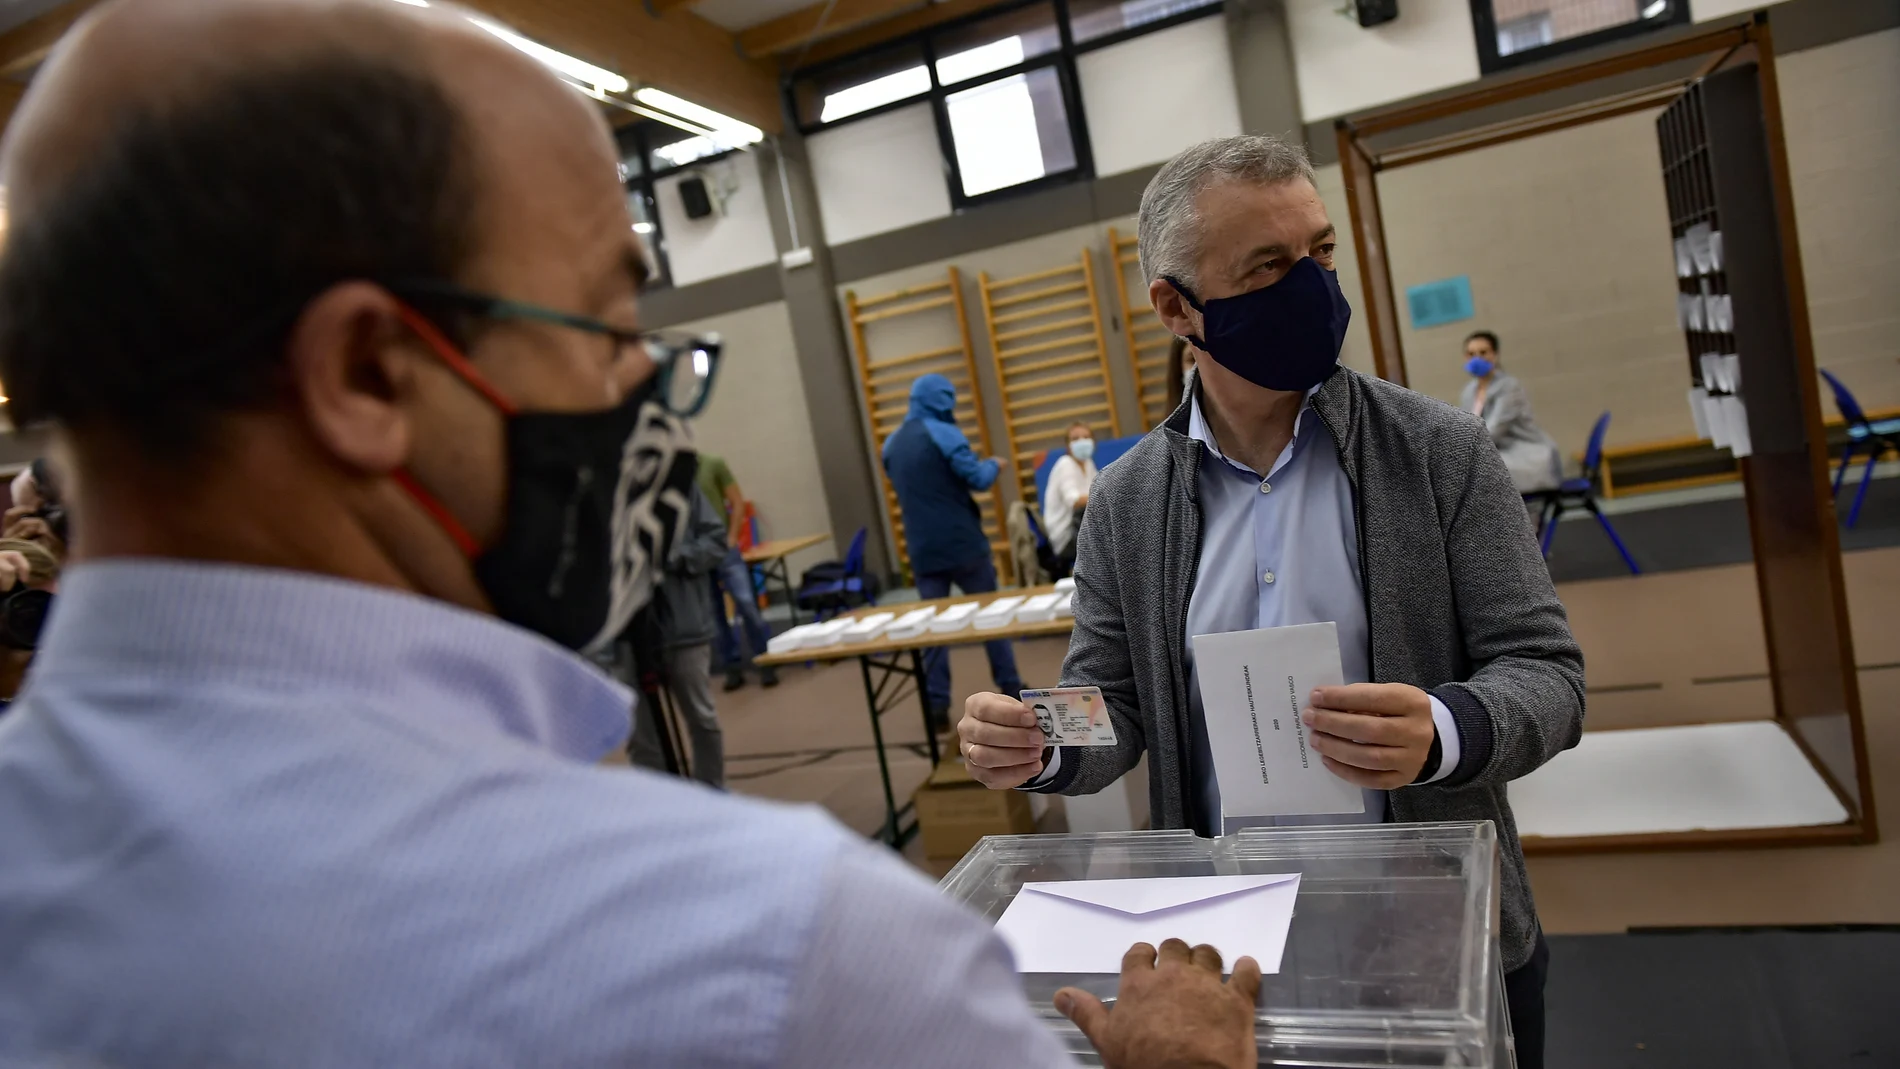 Inigo Urkullo, Basque Lehendakari or Regional President, right, wears a face mask as protection against the coronavirus while voting in a polling station during Basque regional election in the village of Durango, northern Spain, Sunday, July 12, 2020. (AP Photo/Alvaro Barrientos)